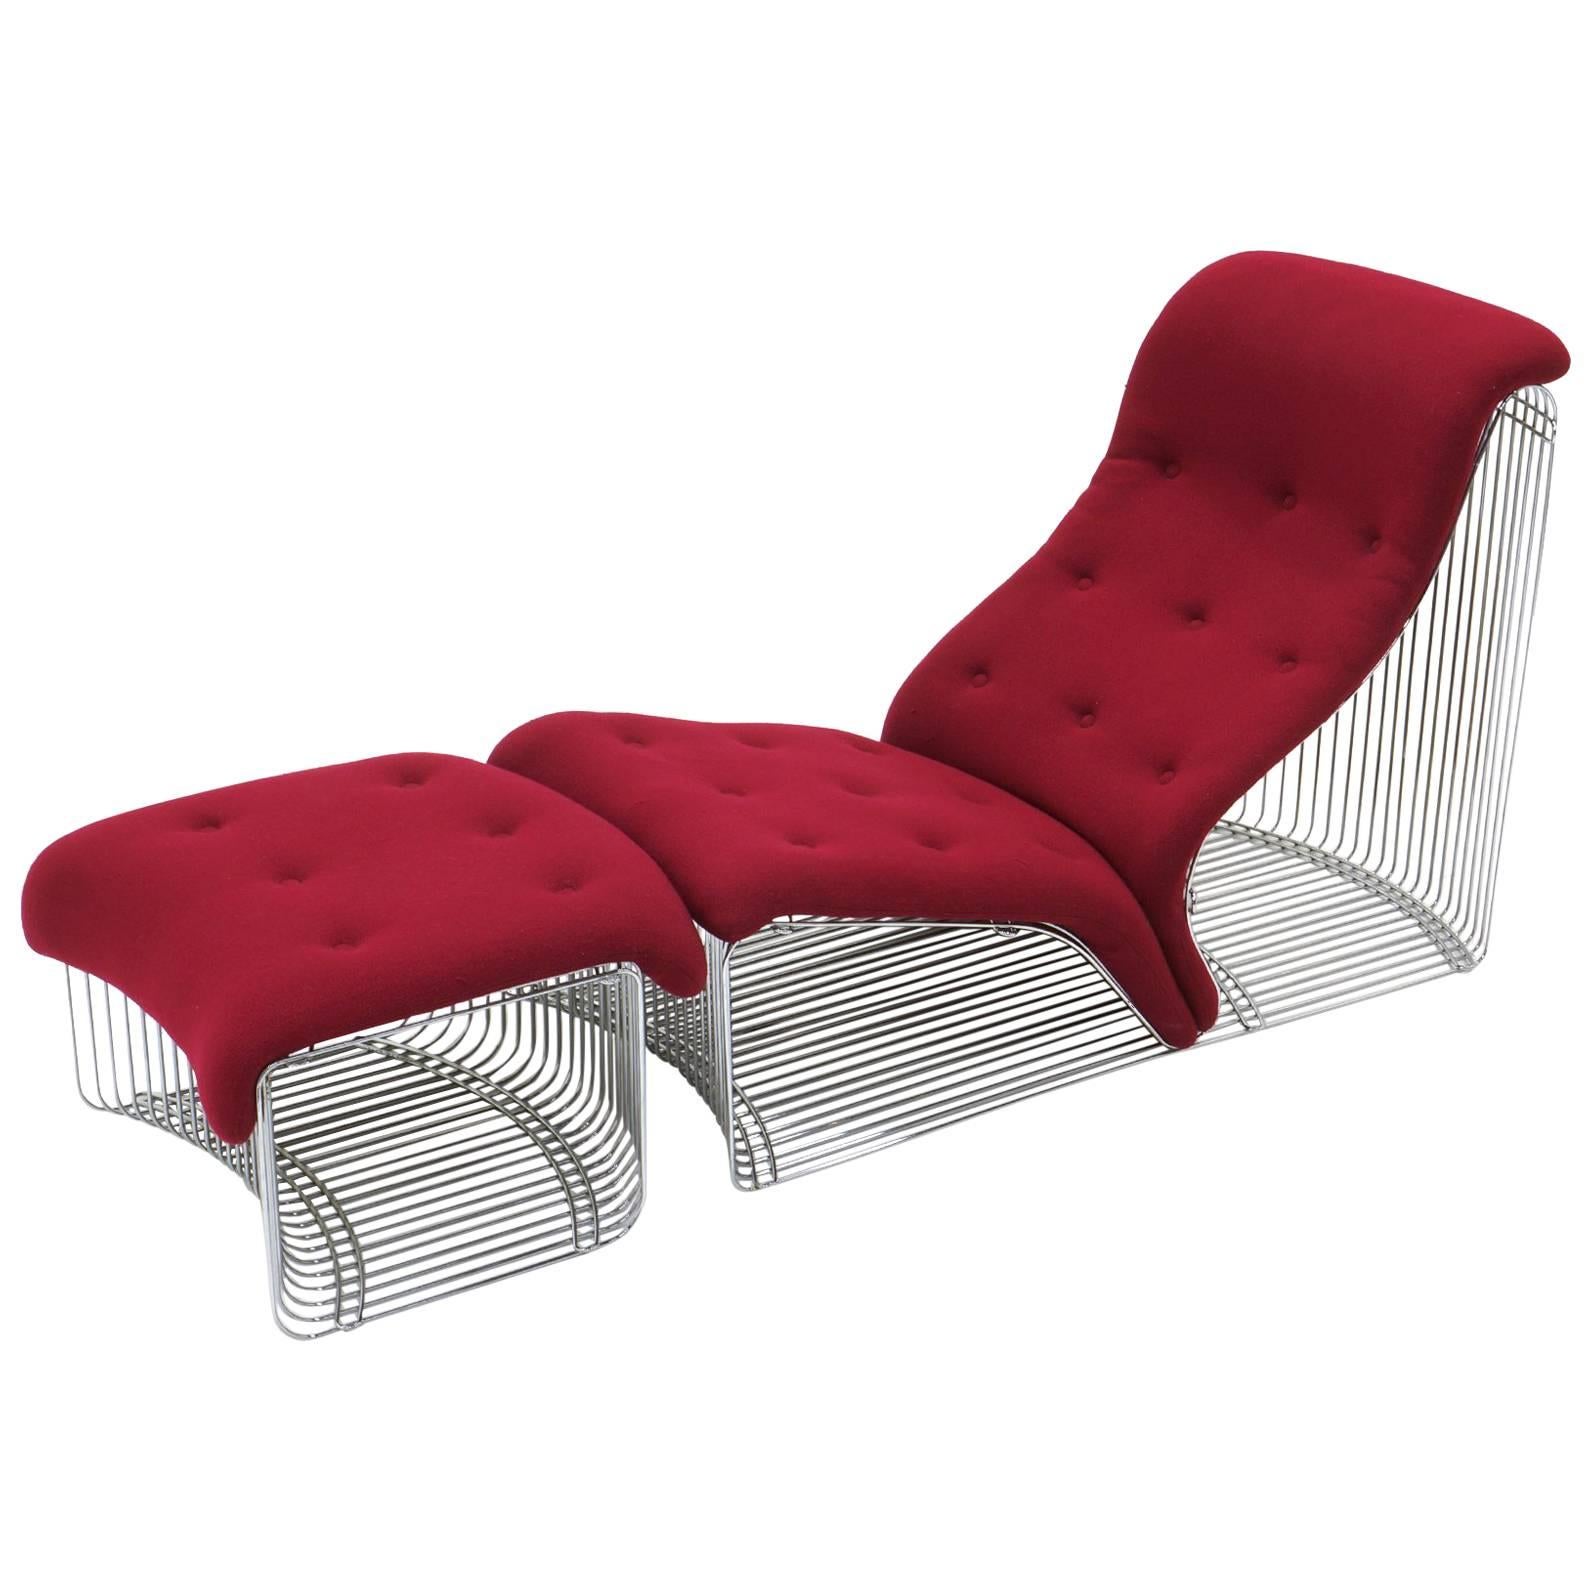 Pantonova chaise or chair and ottoman. Designed by Verner Panton and made by Fritz Hansen, Denmark, circa 1970. Original chromed steel frame and original deep red / berry color fabric in very good condition. Very comfortable. A rare opportunity to